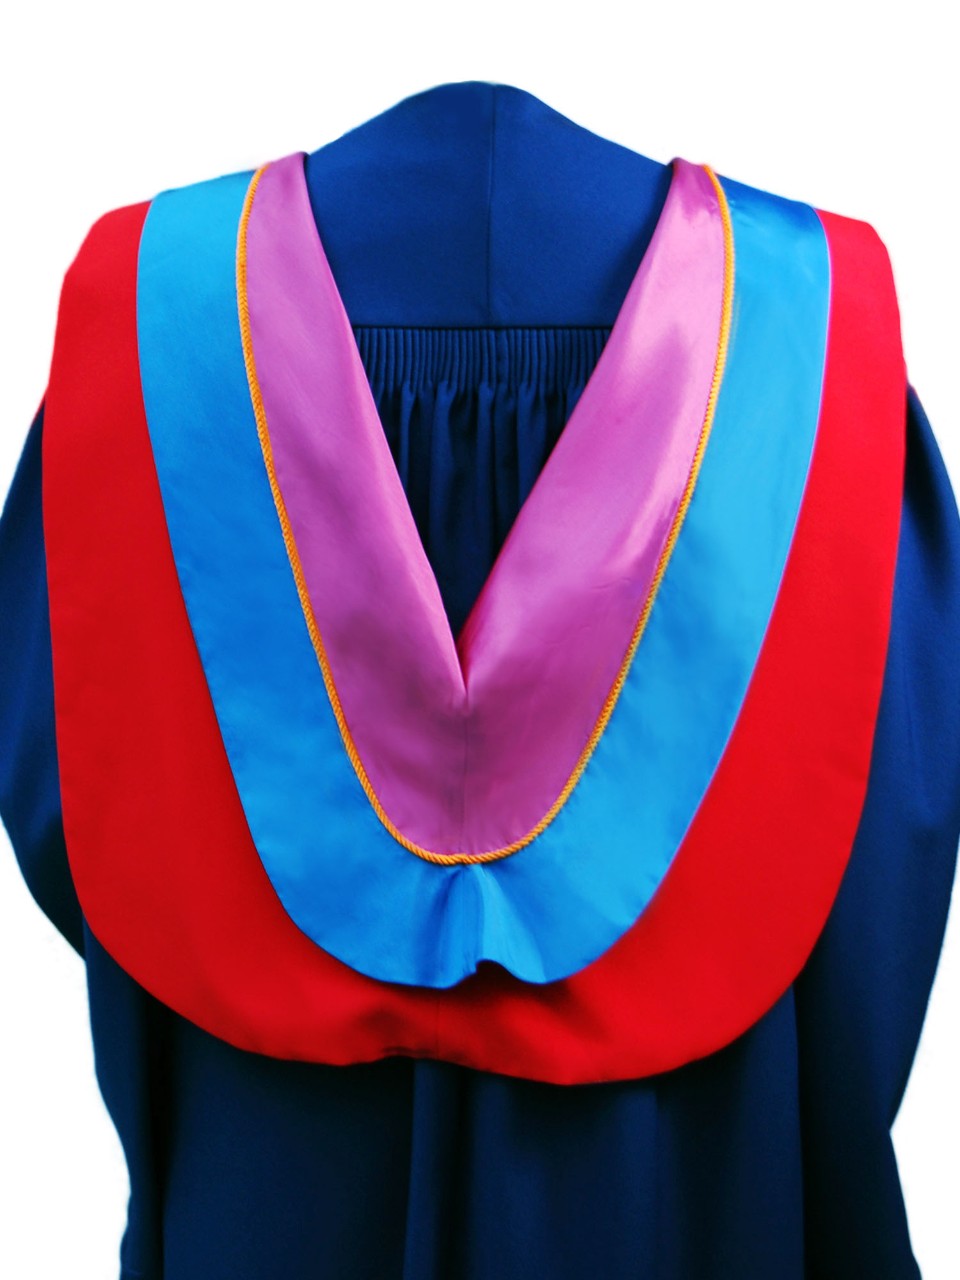 The Master of Arts in Liberal Studies hood is Red with wide blue border, orange cording and plum underside